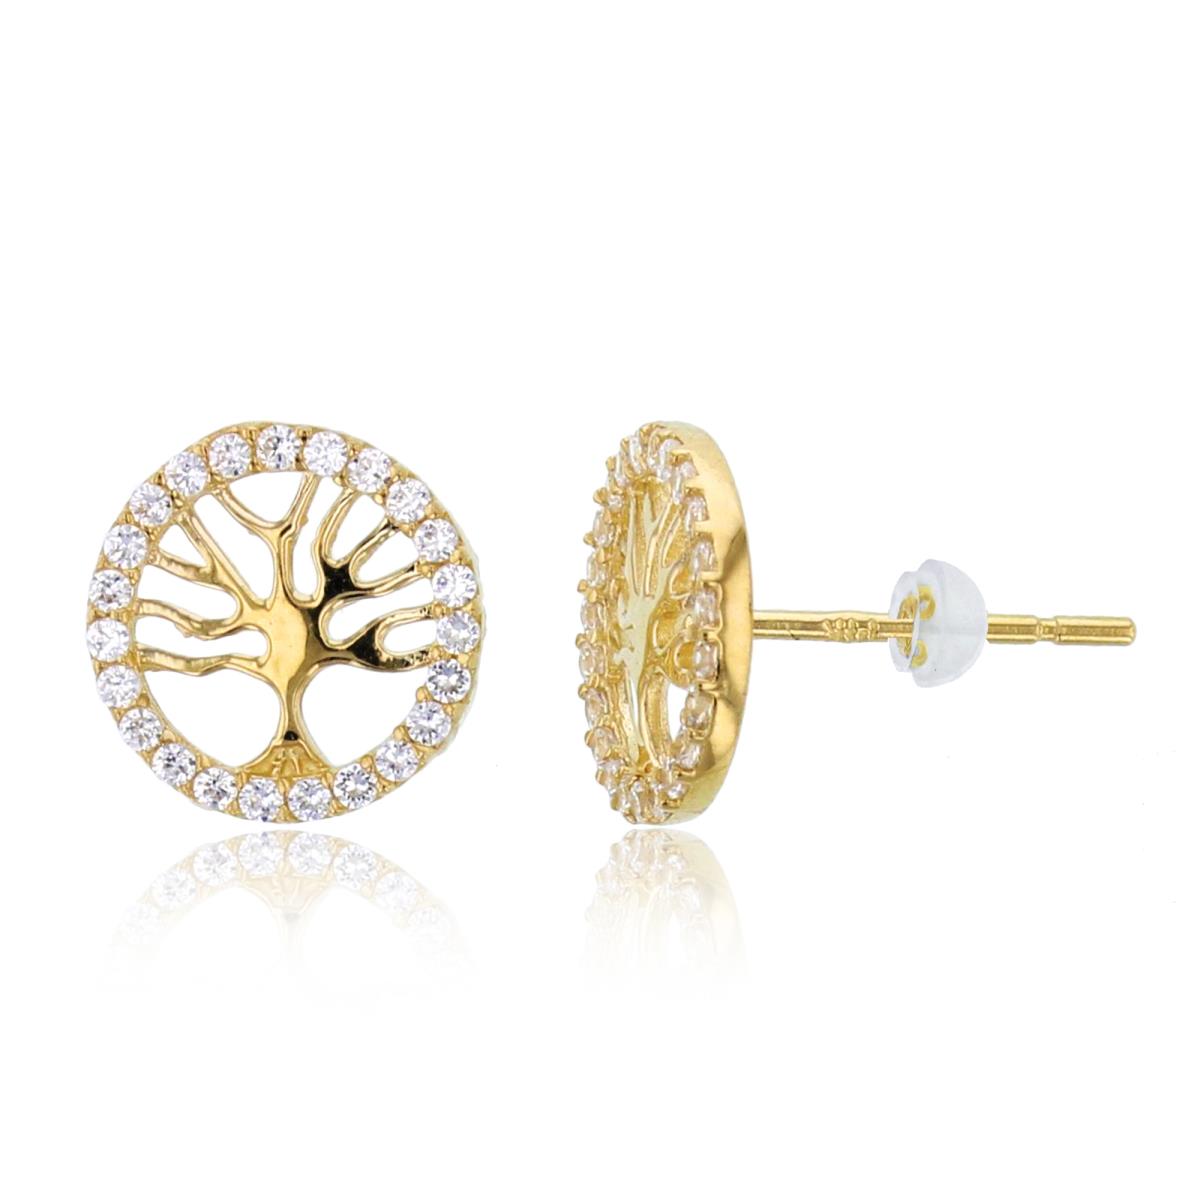 14K Yellow Gold Rnd CZ "Tree of Life" Circle Studs with Silicon Backs